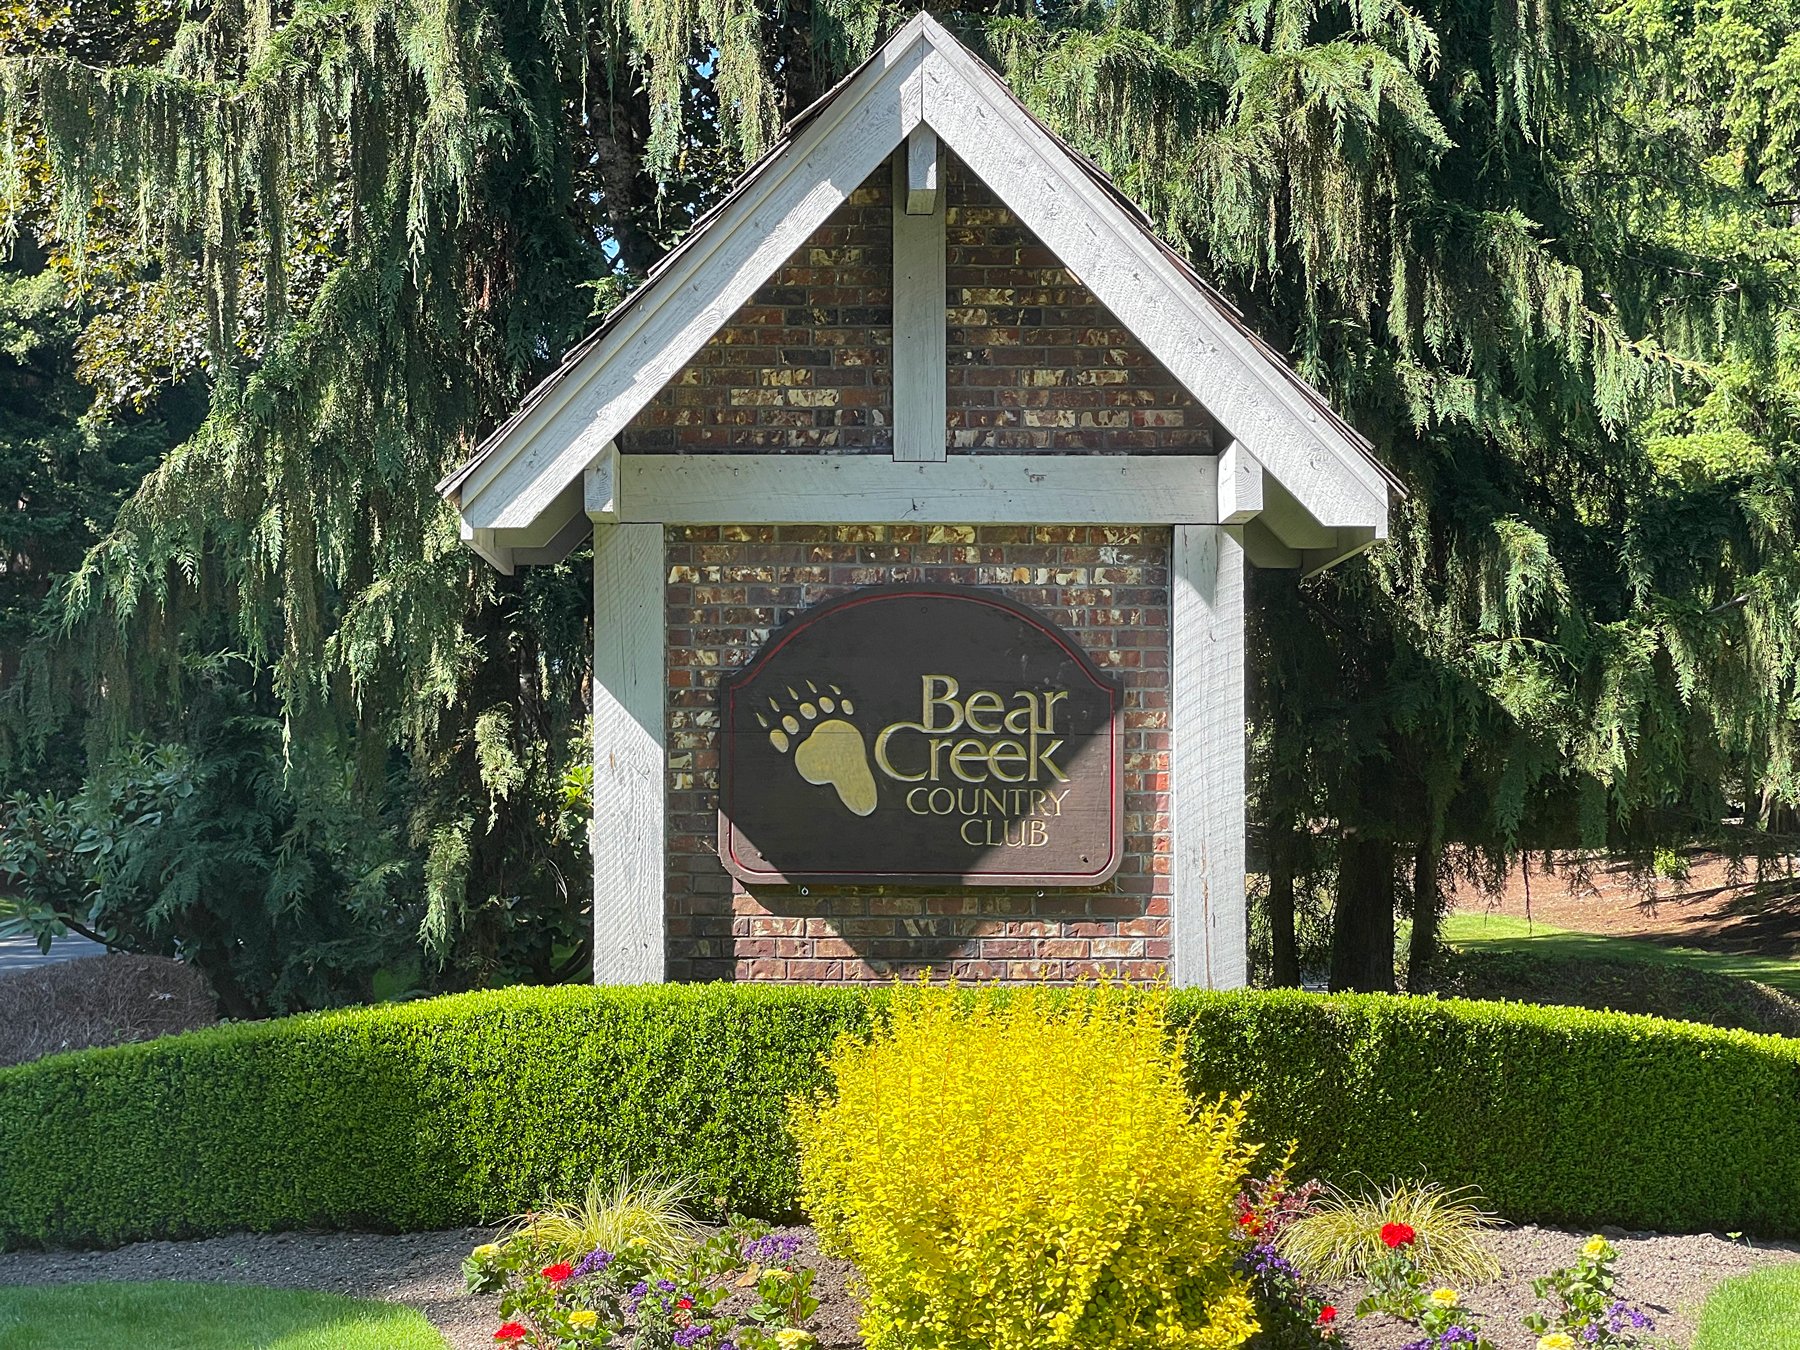 Bear-Creek-Country-Club-front-sign-in-Woodinville-wa.